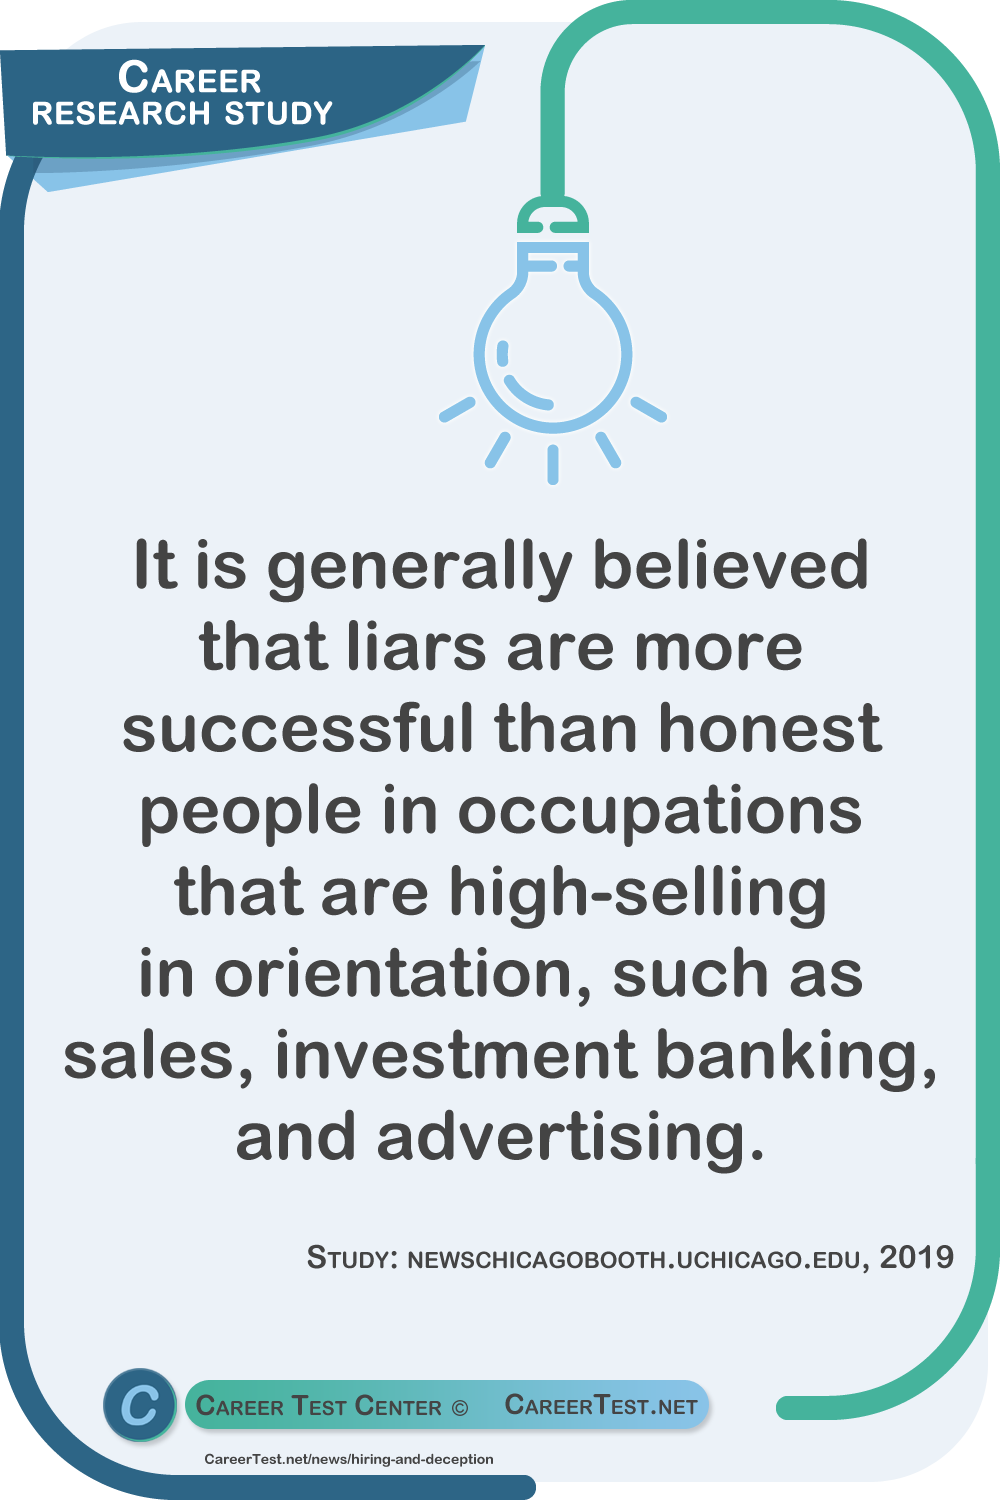 It is generally believed that liars are more successful than honest people in occupations that are high-selling in orientation, such as sales, investment banking, and advertising. - Source: newschicagobooth.uchicago.edu